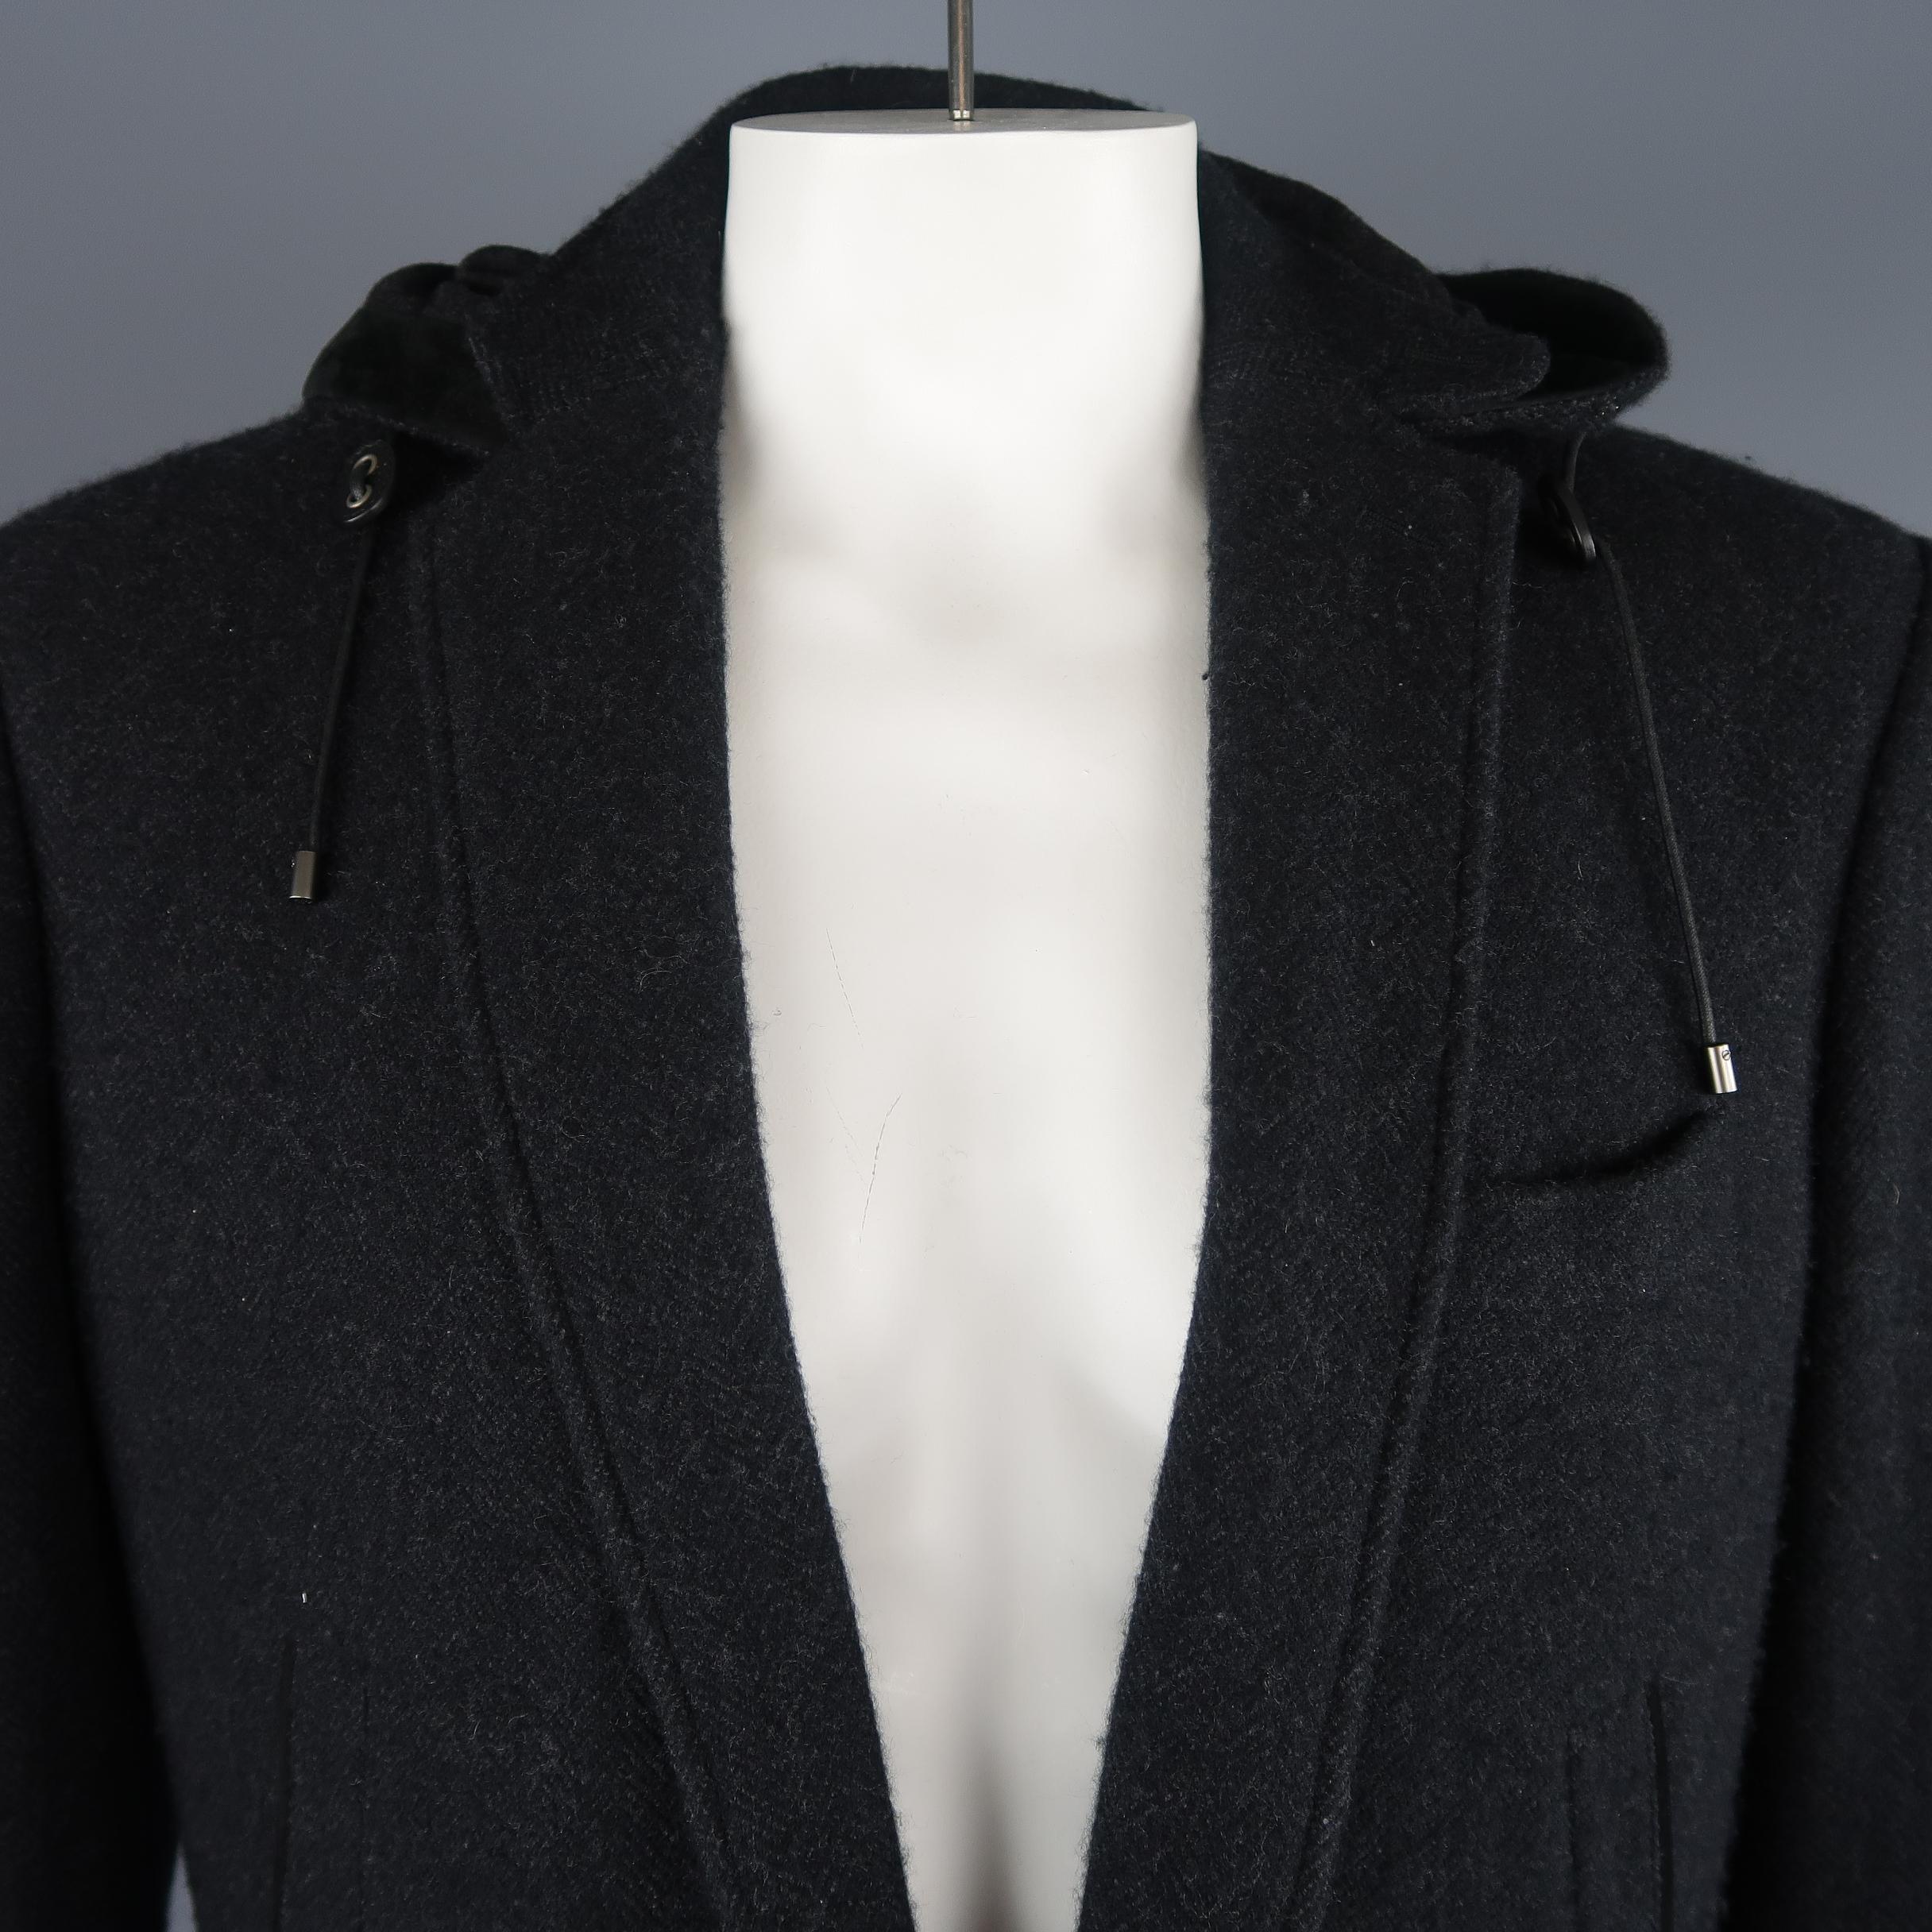 Ralph Lauren Purple Label sport jacket comes in black and charcoal cashmere herringbone with a notch lapel, two button closure, slanted pockets, patch flap military style pockets, leather piping, and a detachable hood. Minor wear. Made in Italy.
